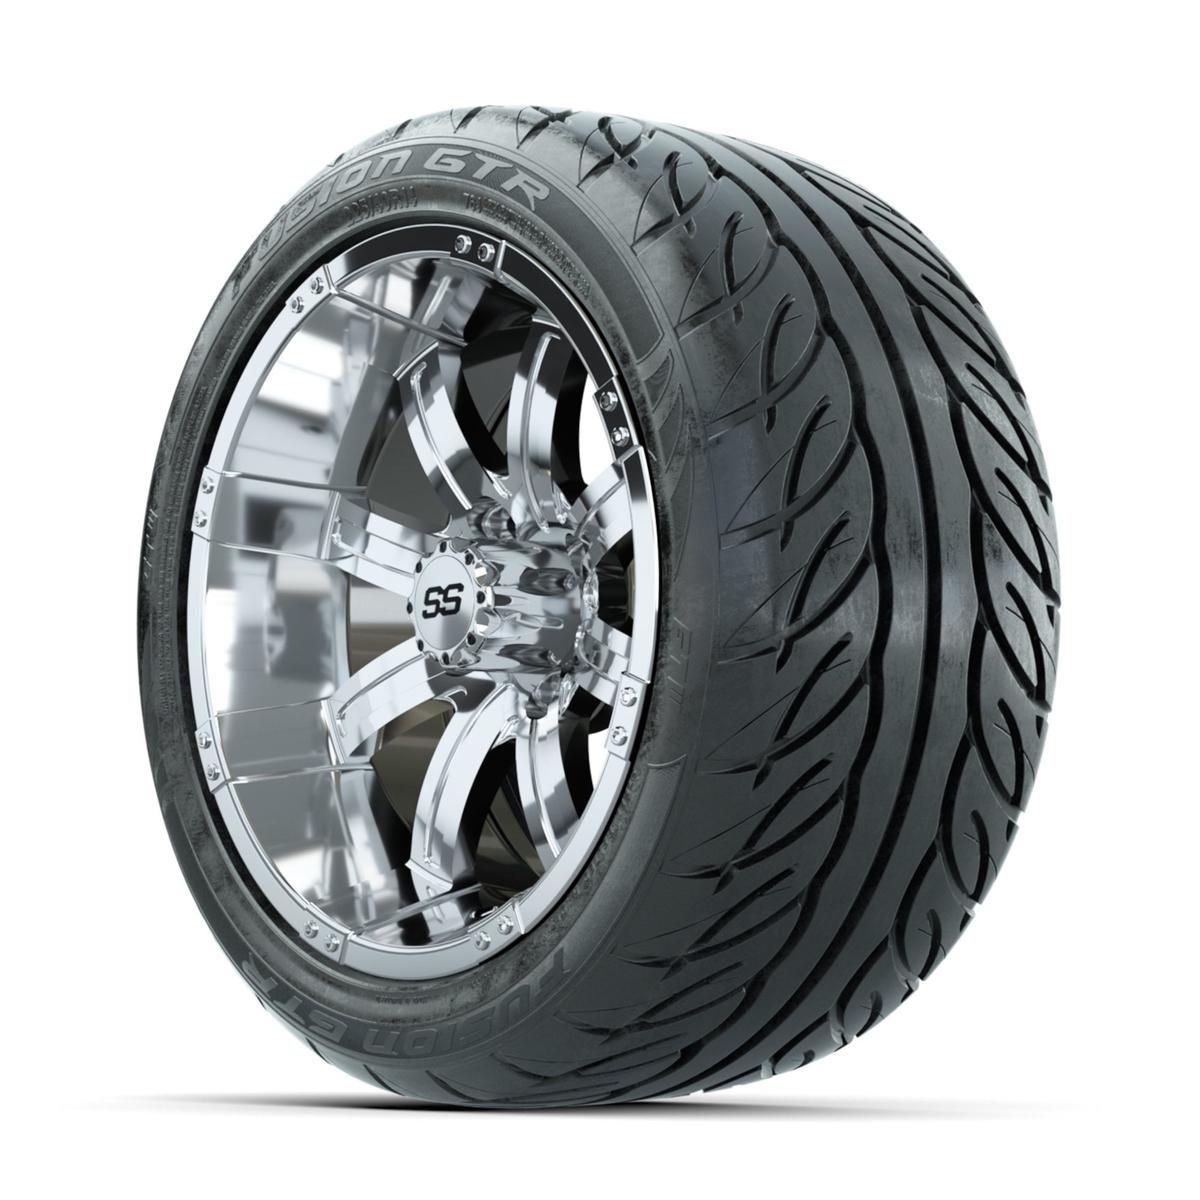 GTW Tempest Chrome 14 in Wheels with 225/40-R14 Fusion GTR Street Tires – Full Set